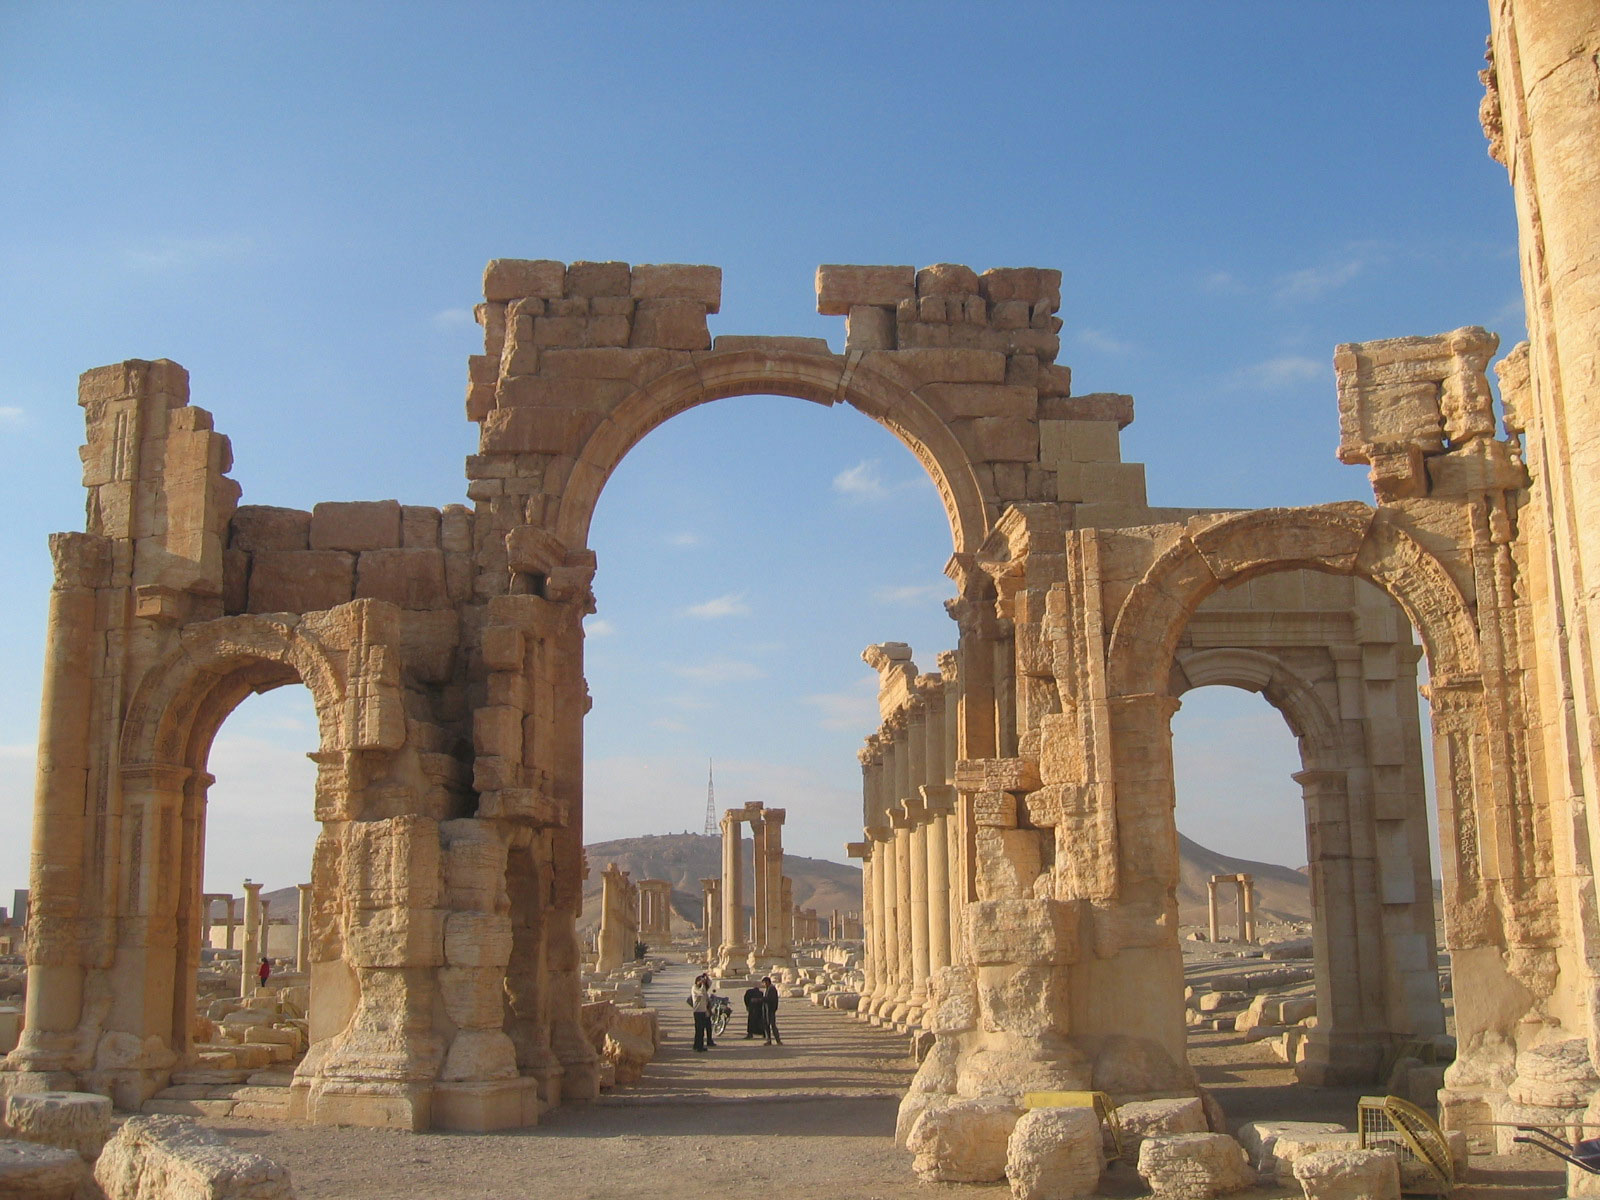 Palmyra's Arch of Triumph blown up by IS